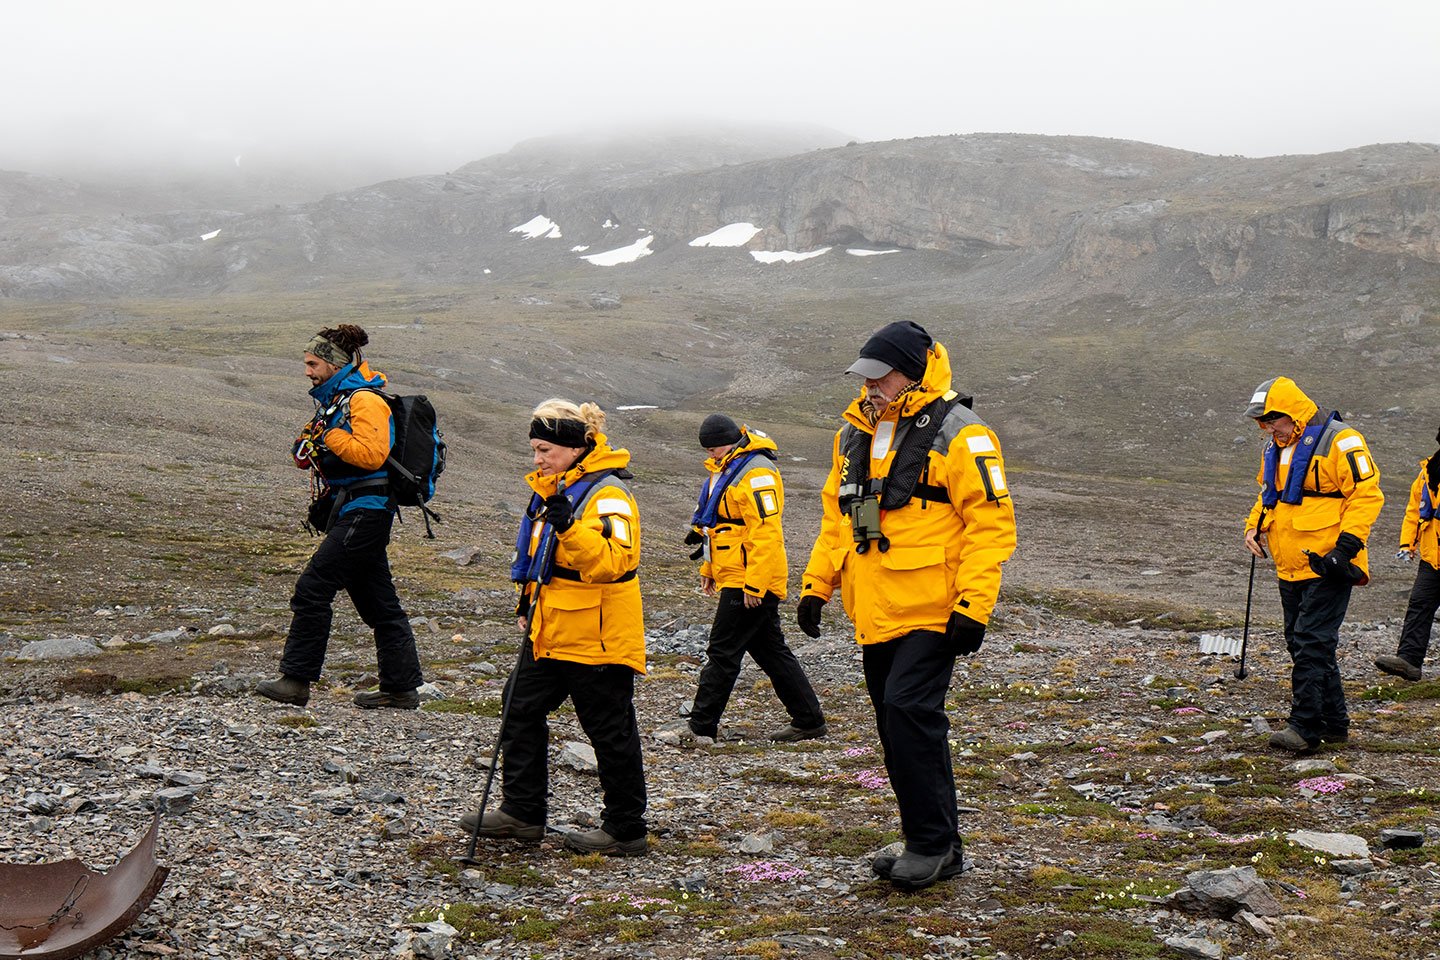 Quark Expeditions&apos; guests explore the Arctic on foot accompanied by the most seasoned polar experts in the industry.